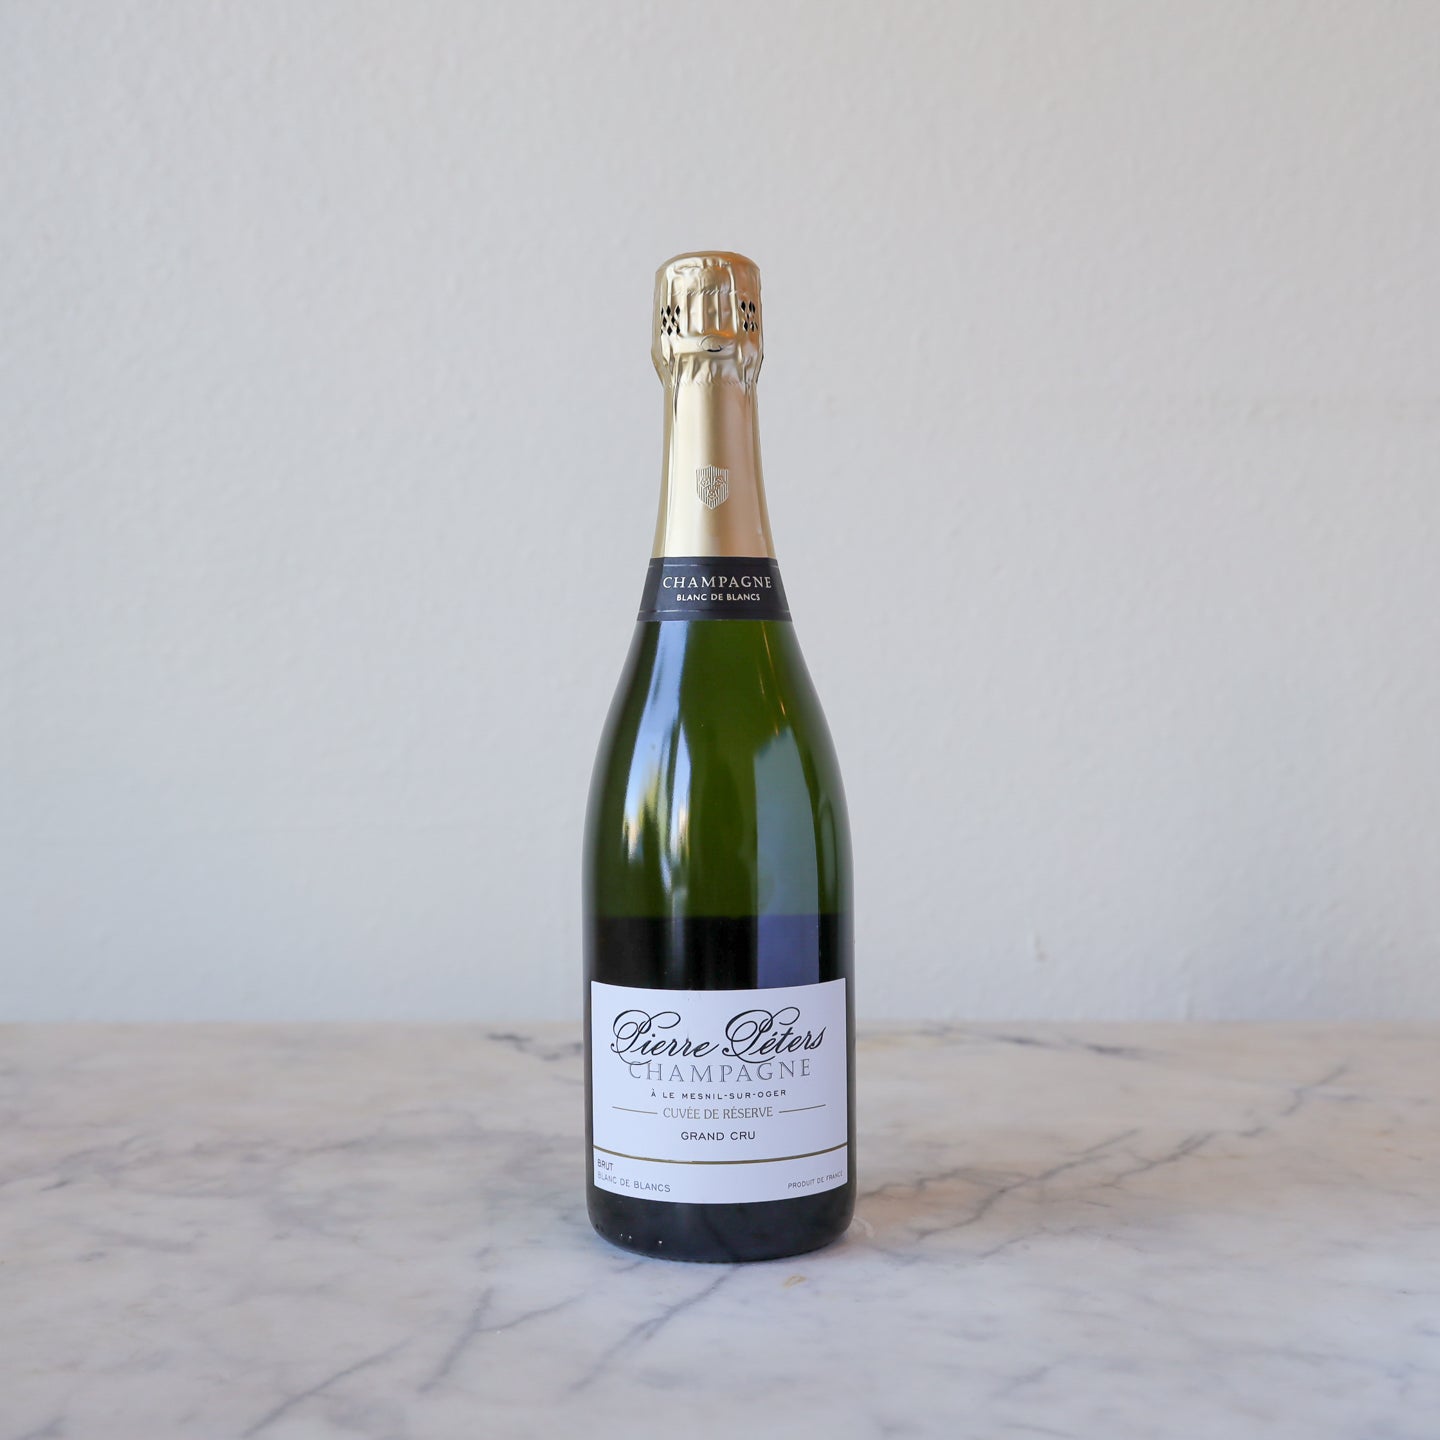 Pierre Peters, Champagne 'Cuvee Reserve' NV